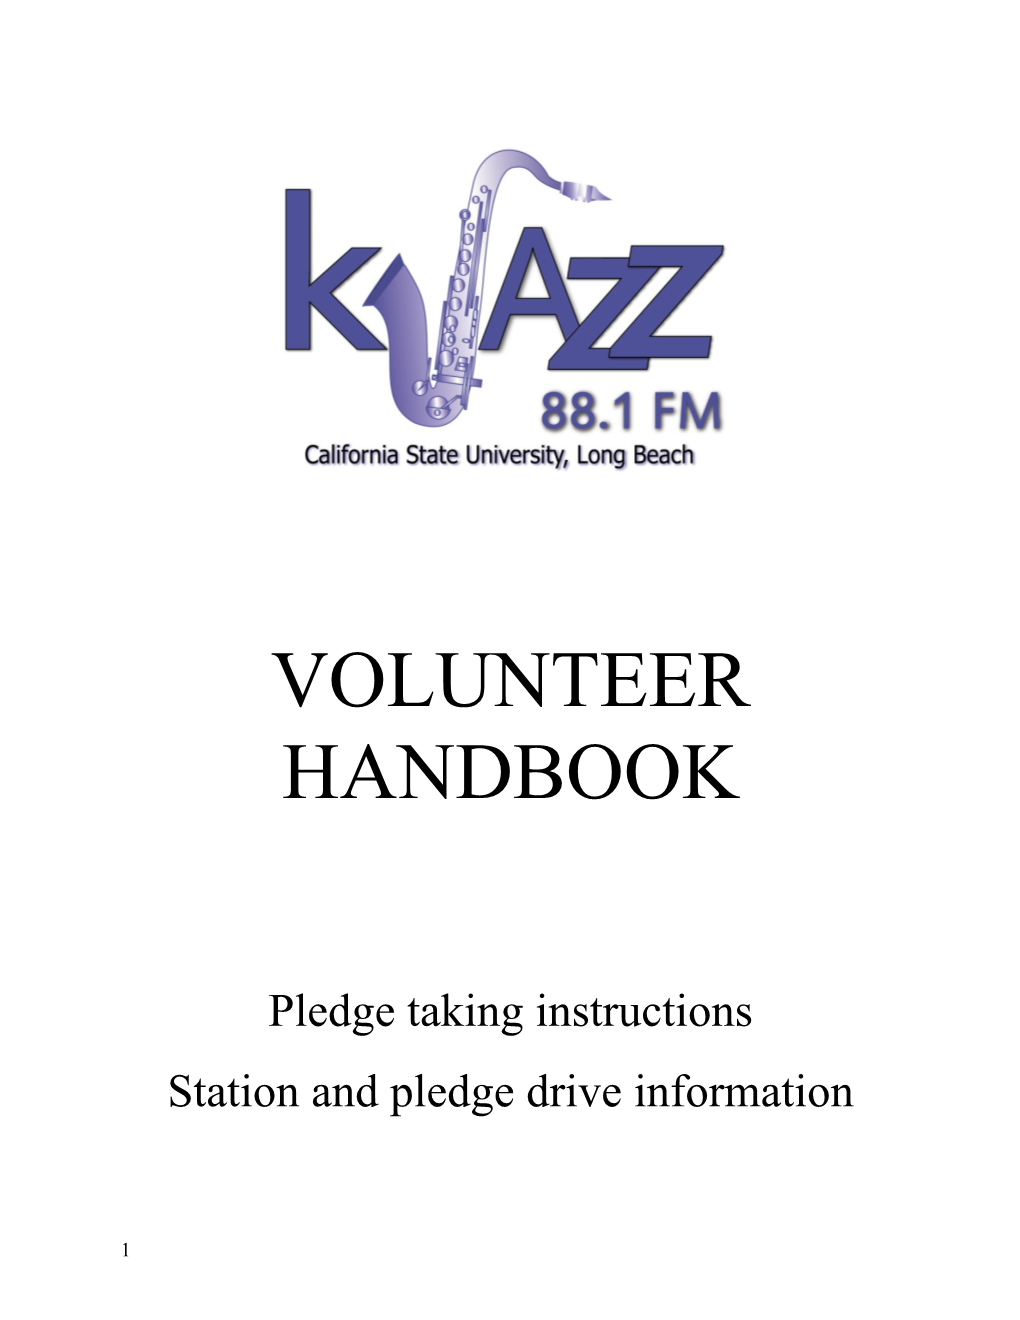 Thank You for Volunteering with Kjazz 88.1 FM